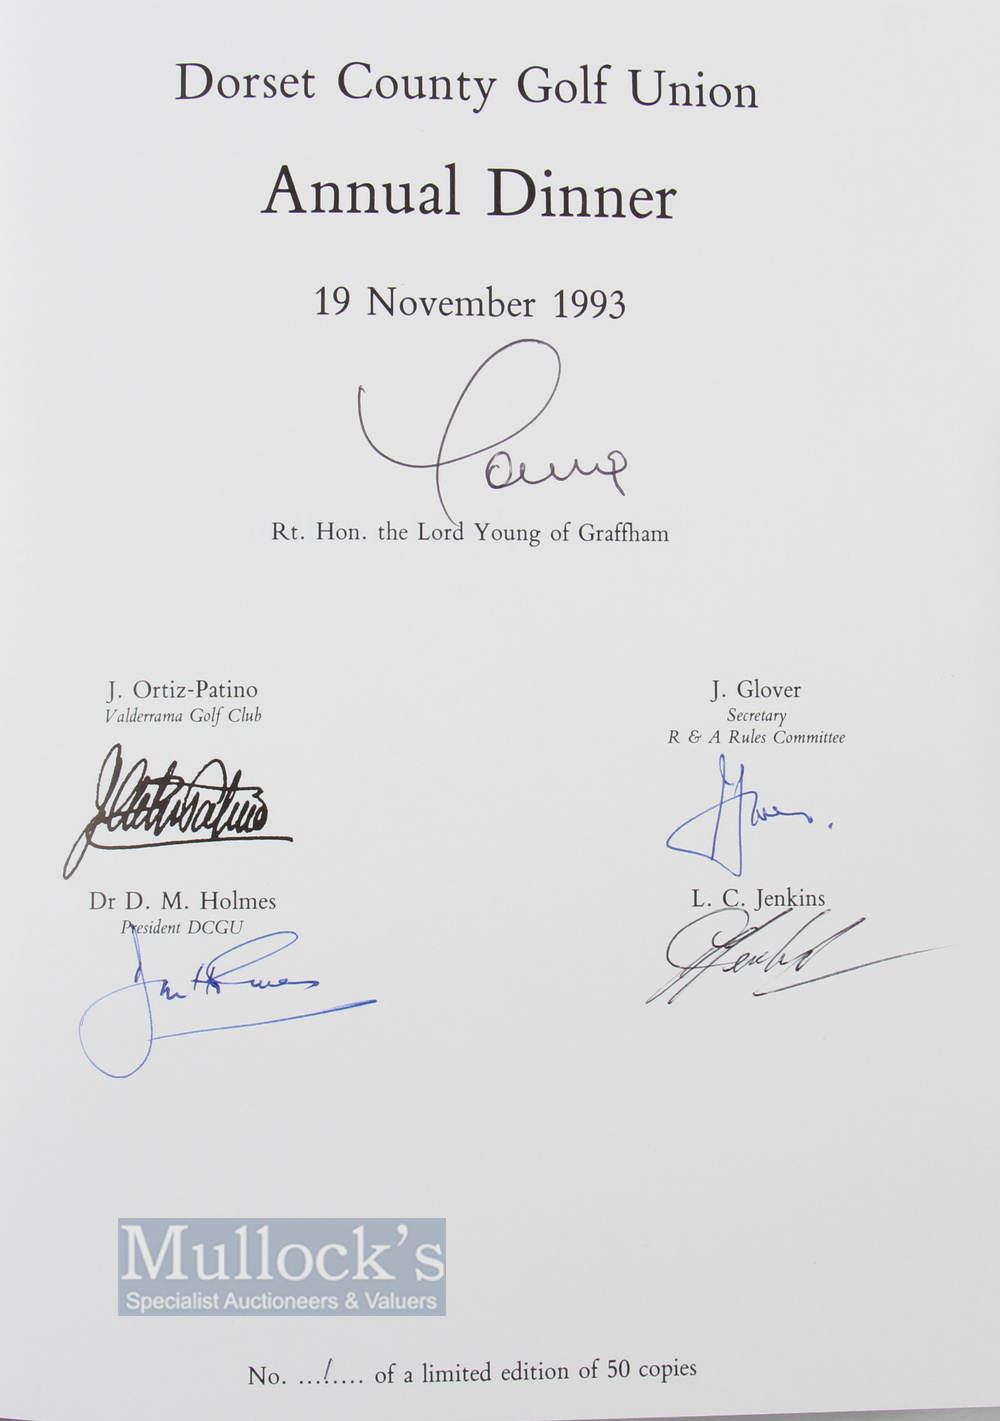 Multi-Signed - Jenkins, L C- 'Golf in Hardy Country' ltd ed 1/50 copies - 1993, signed by Lord Young - Image 3 of 3